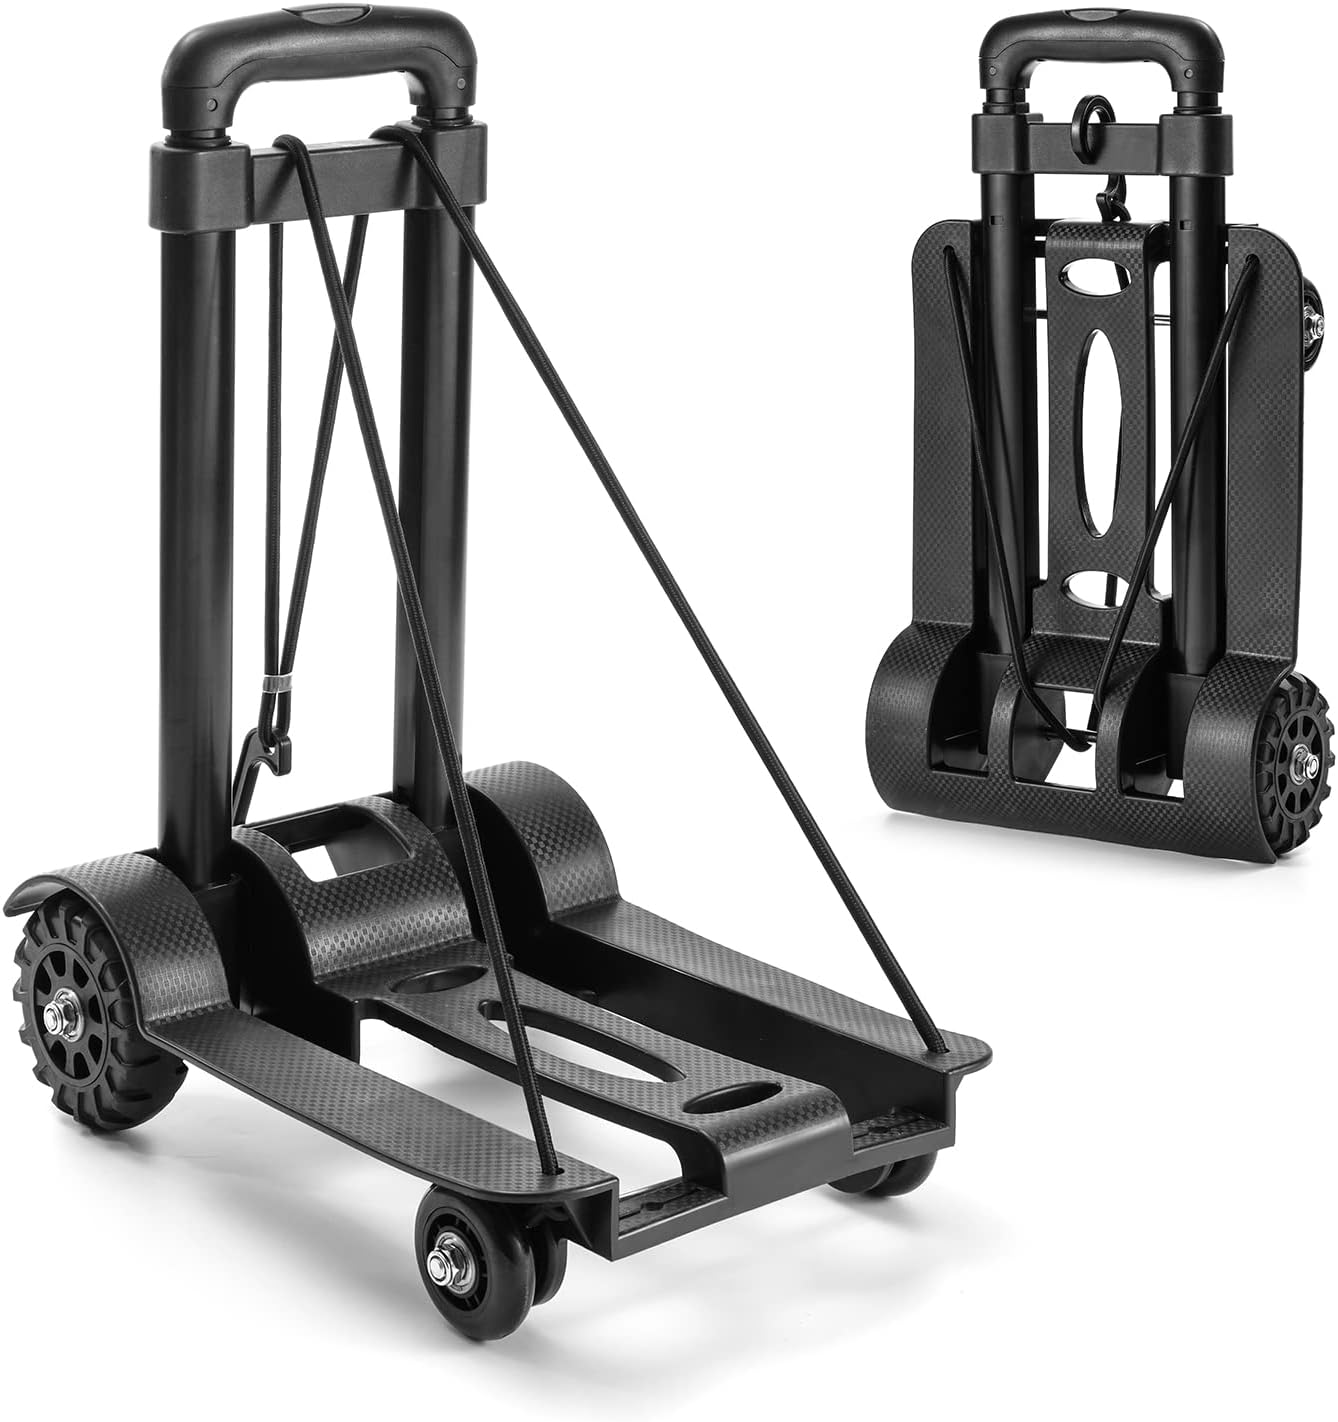 Lightweight Folding Hand Truck Portable Luggage Cart with Wheels & Black 